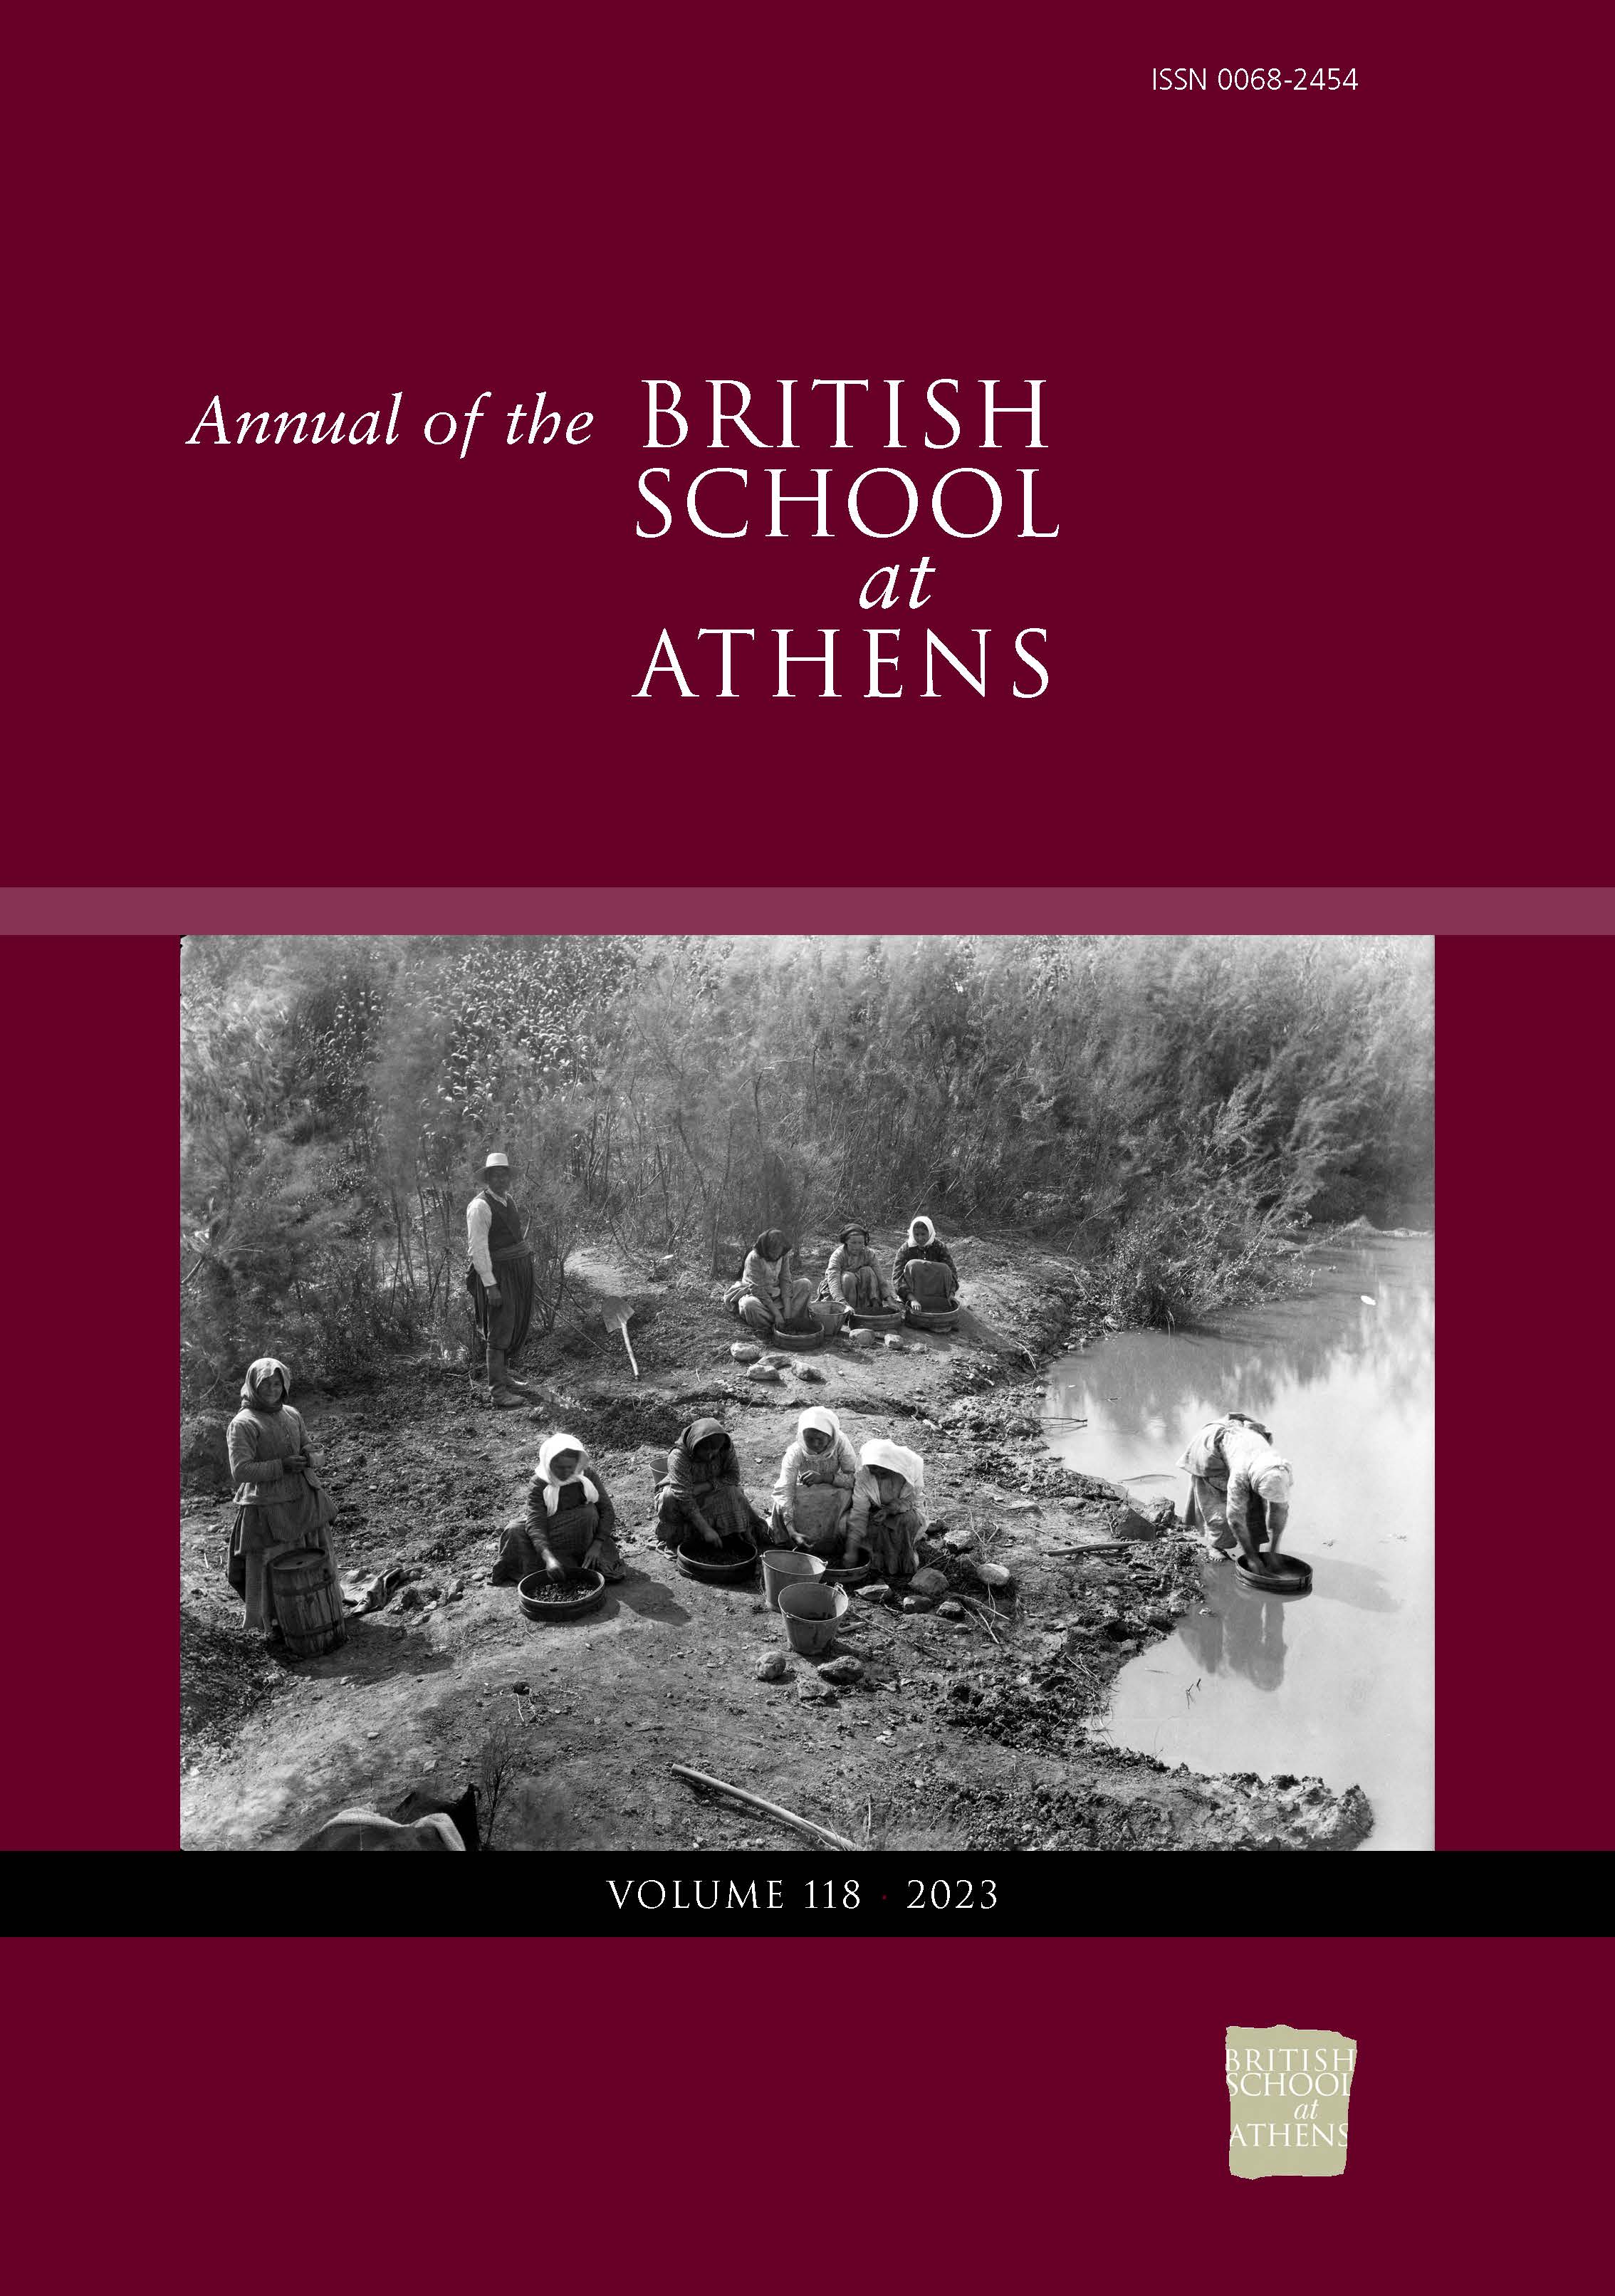 The Aegean coastlands under threat: Some coins and coin hoards from the reign of Heraclius | Annual of the British School at Athens | Cambridge Core